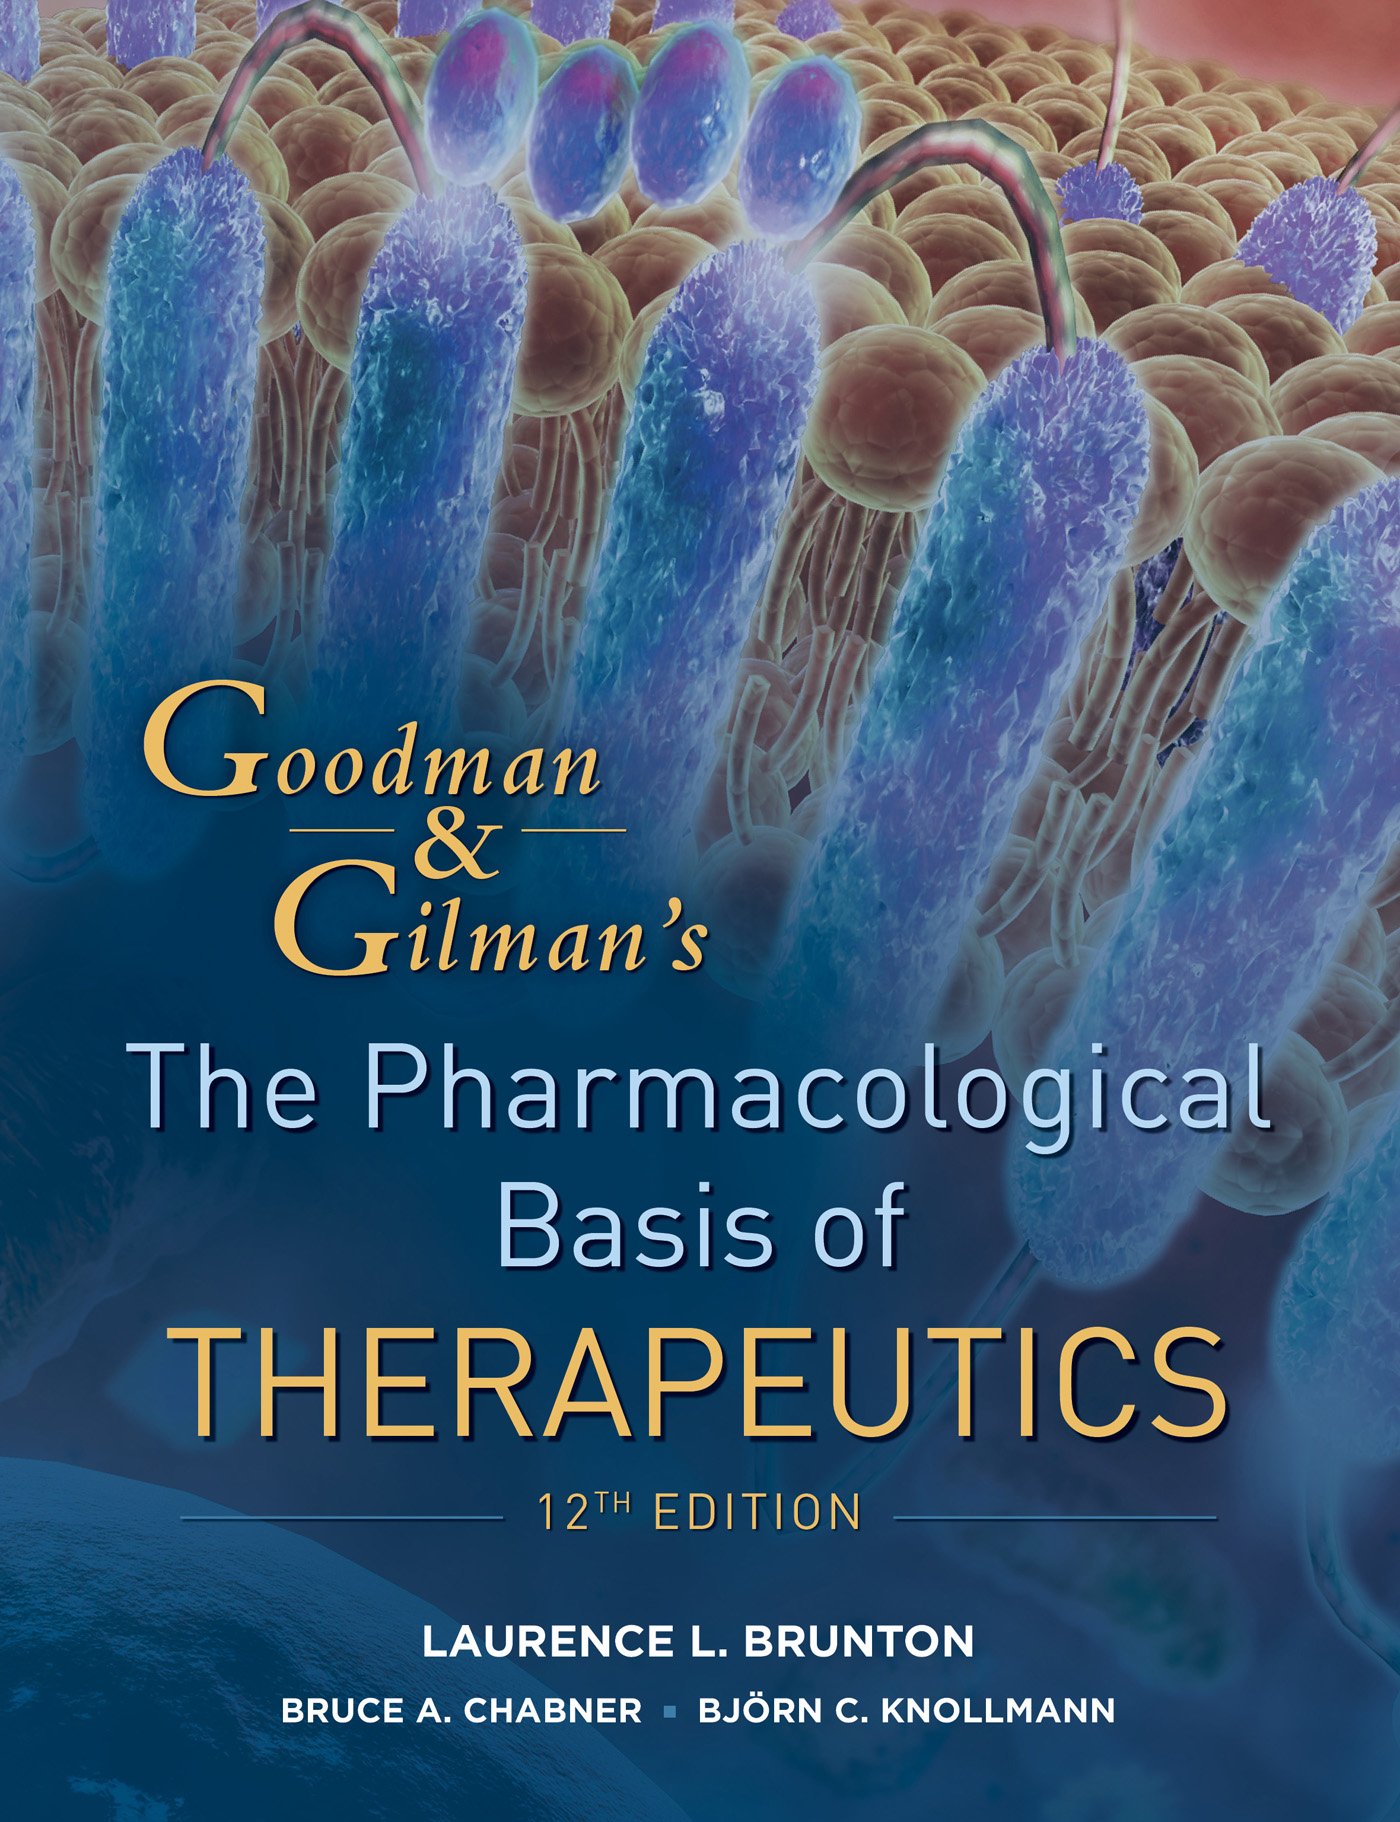 GOODMAN AND GILMAN’S PHARMACOLOGY  12th EDITION PDF Free Download